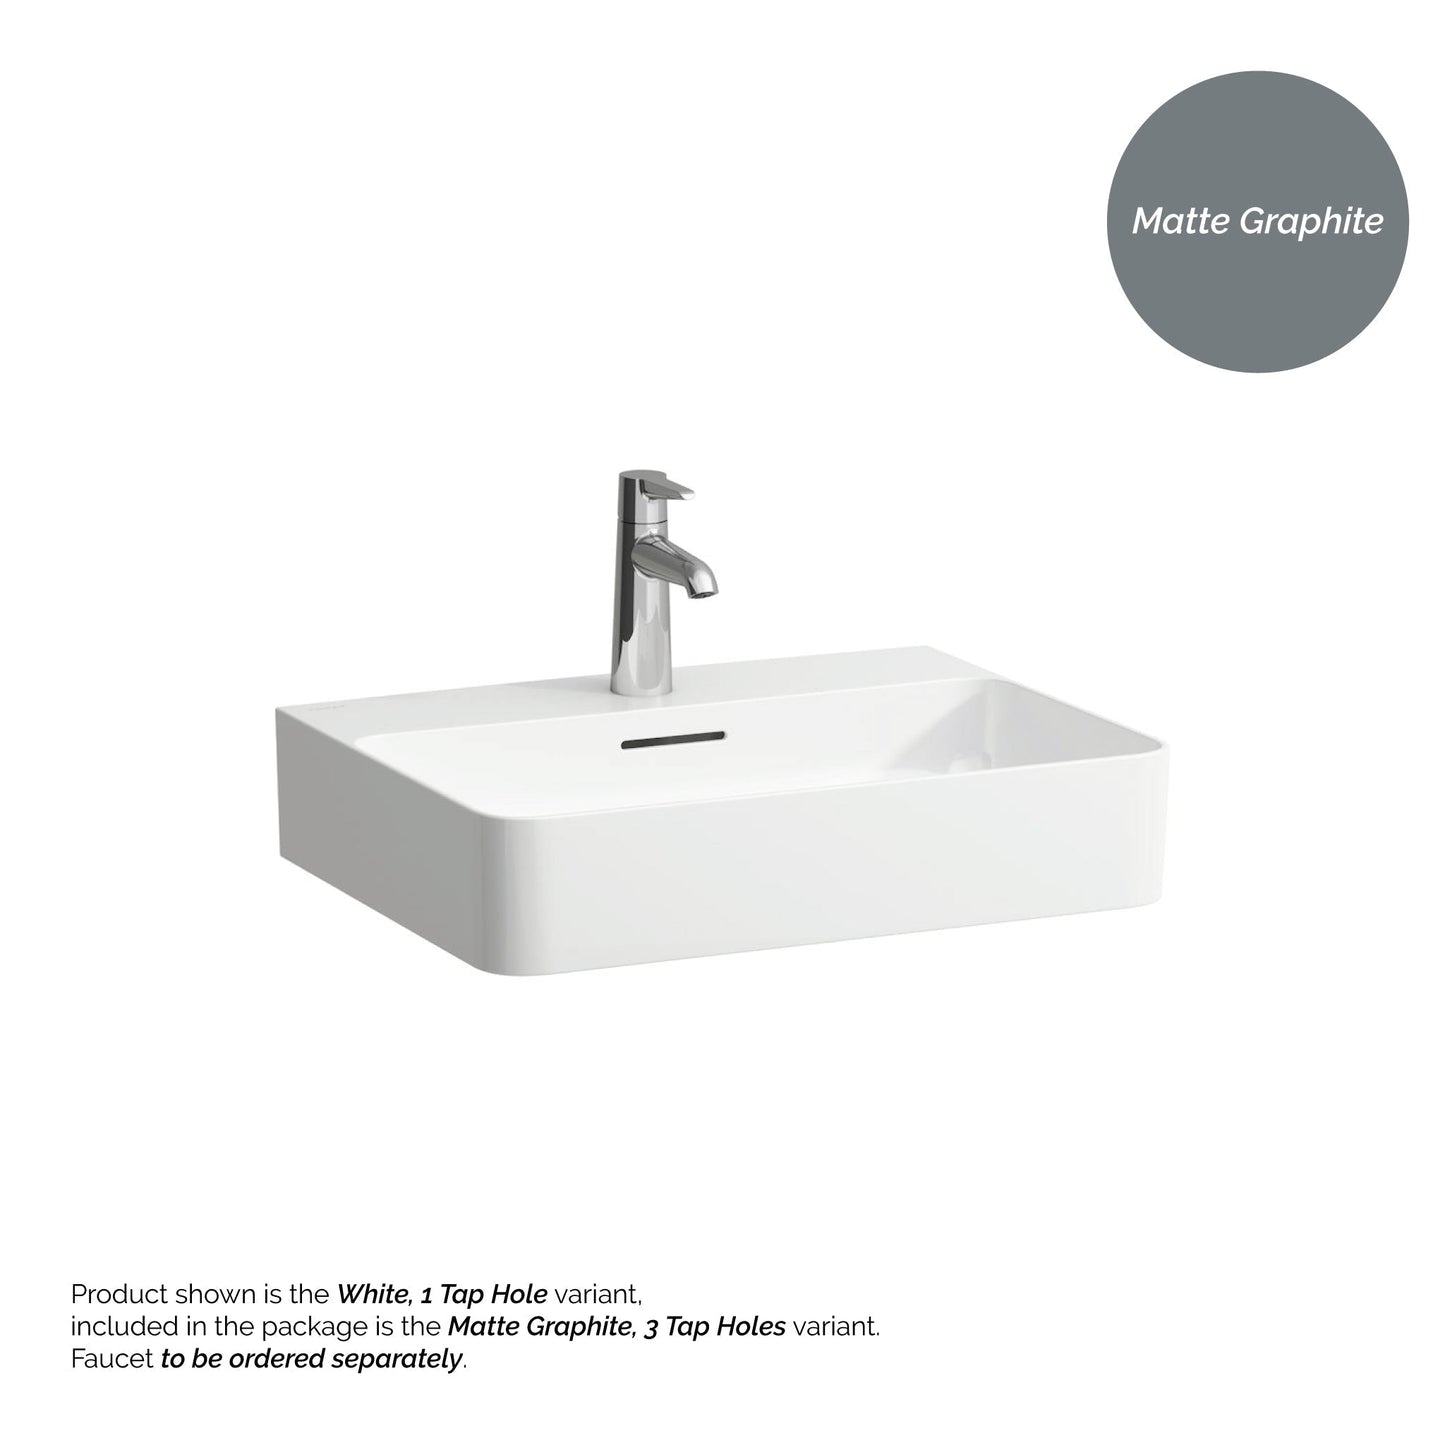 Laufen Val 22" x 17" Matte Graphite Ceramic Wall-Mounted Bathroom Sink With 3 Faucet Holes